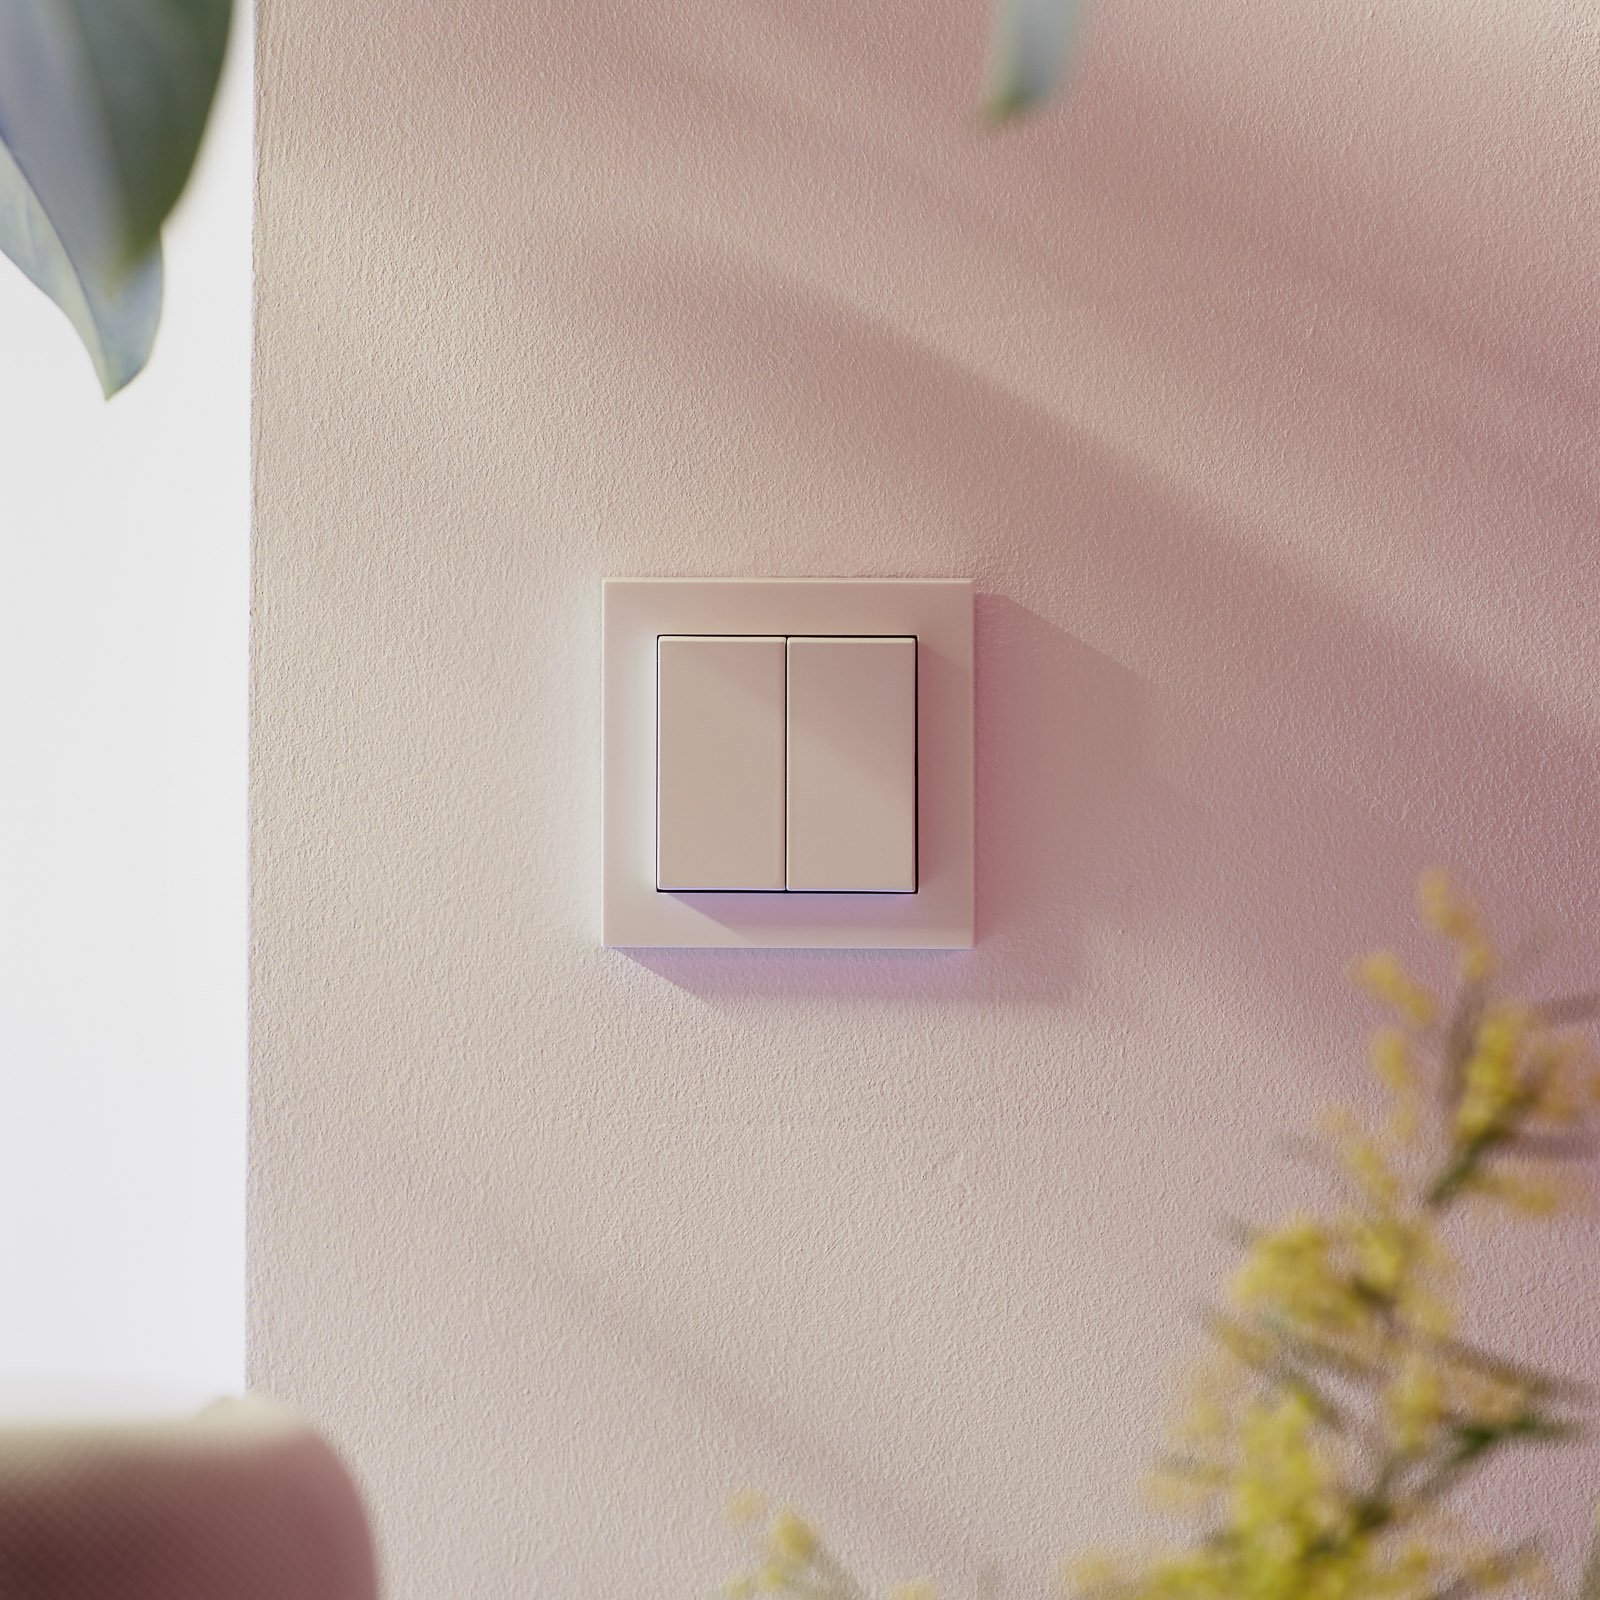 Senic Smart Switch Philips Hue 3-delig, wit glanzend